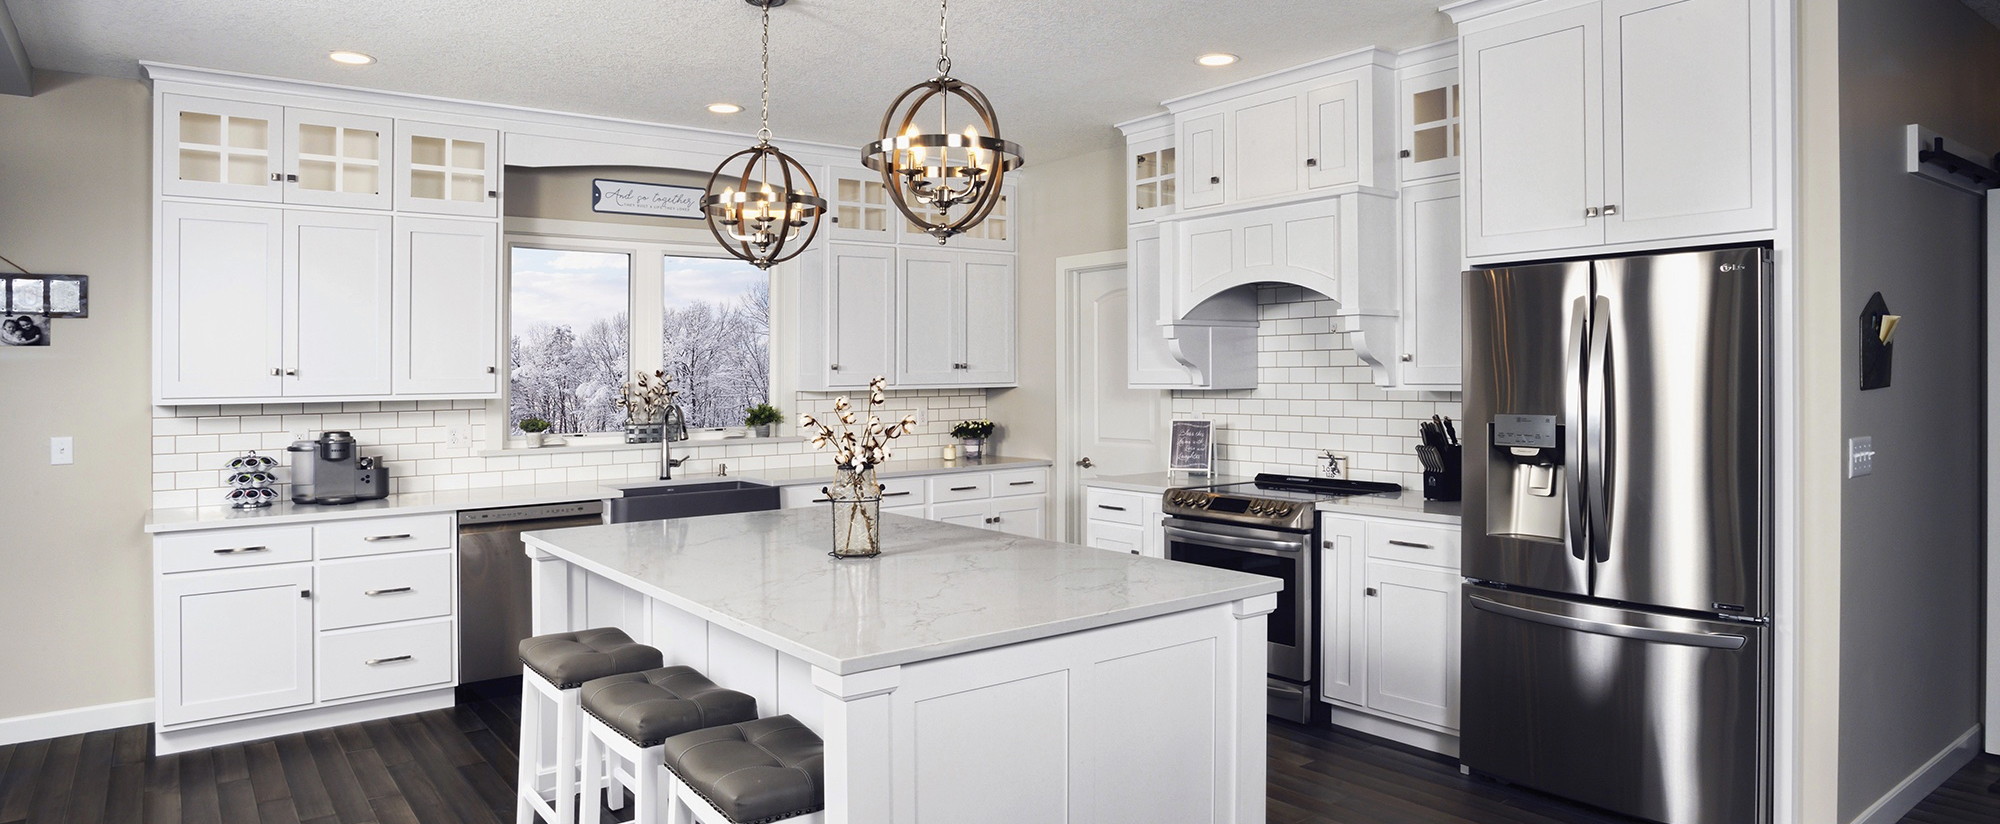 Quality Kitchen And Hardware In Walnut Creek Area